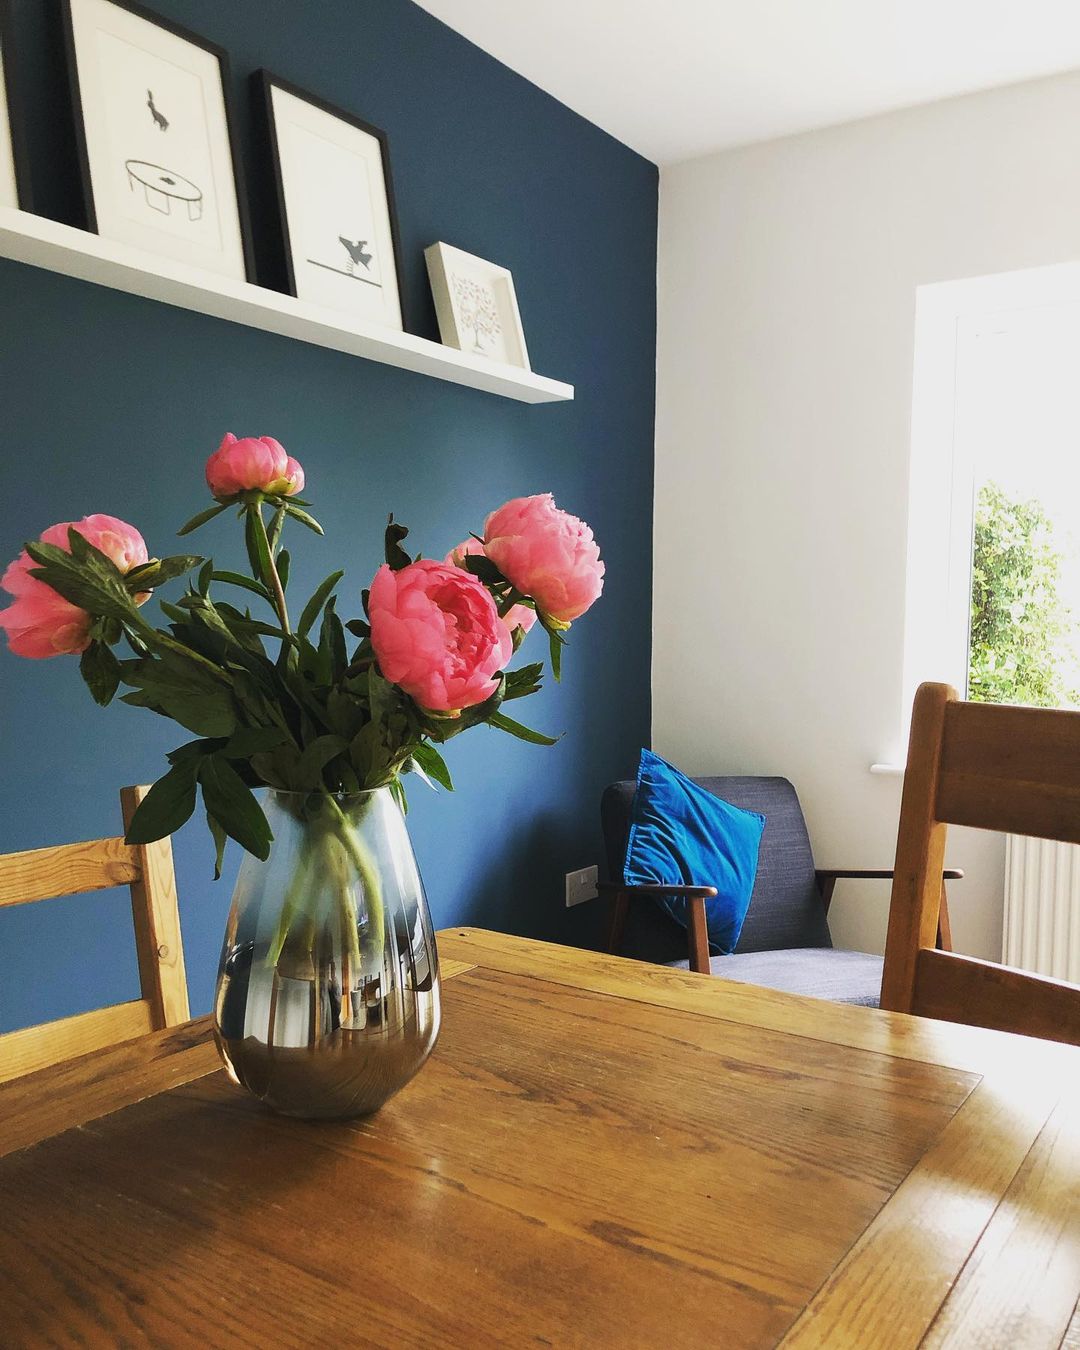 Fresh Flowers Sitting on a Table. Photo by Instagram user @binswood_end